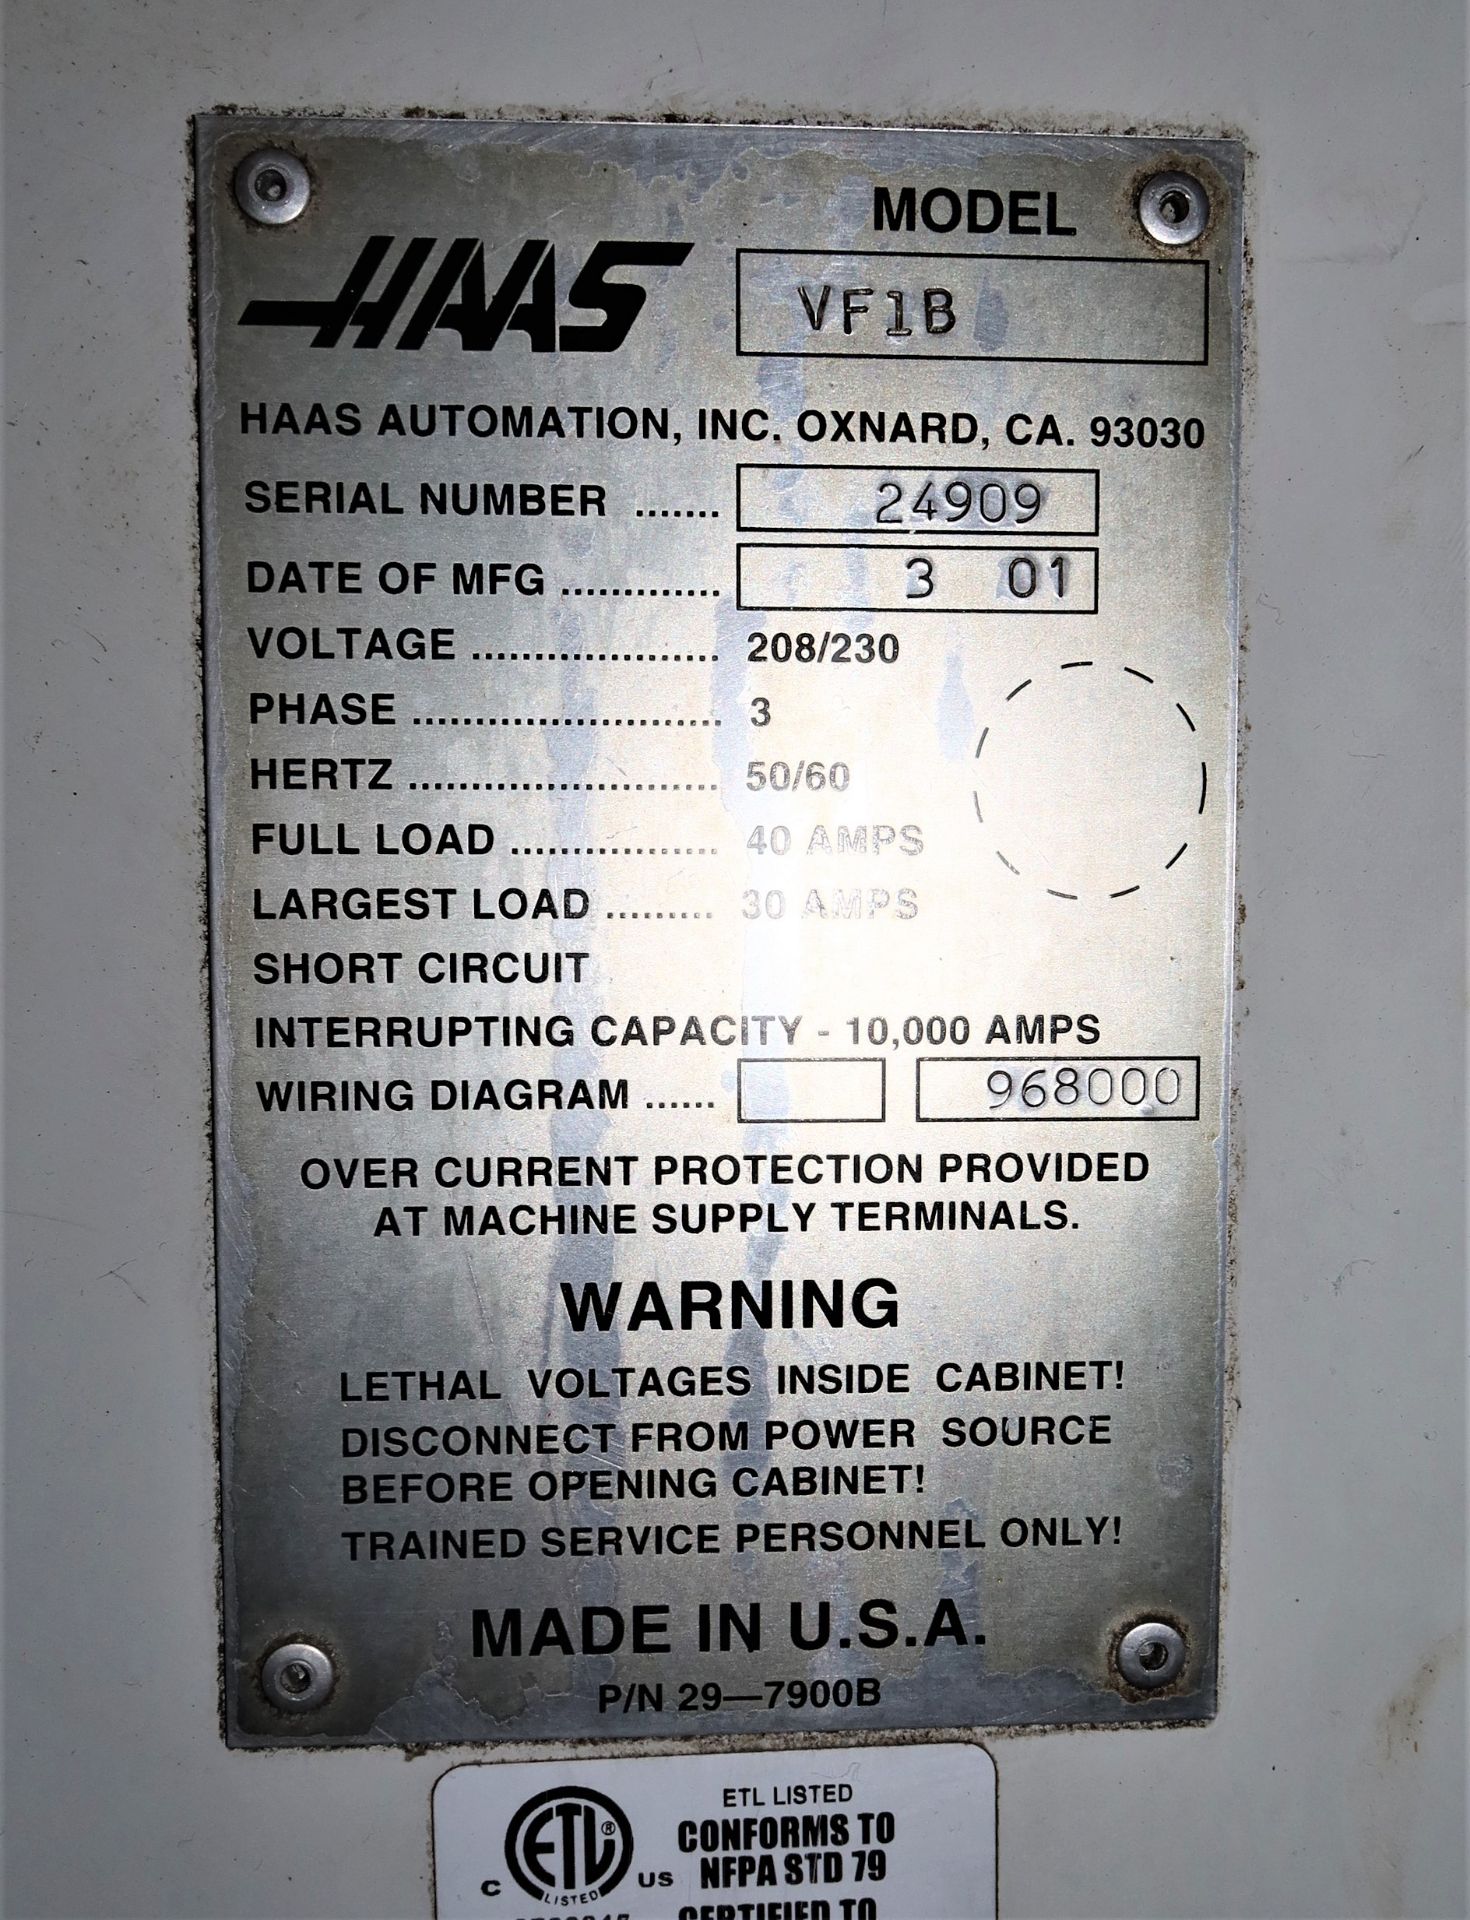 Haas VF-1 3-Axis CNC Vertical Machining Center, S/N 24909, New 2001 - Image 10 of 11